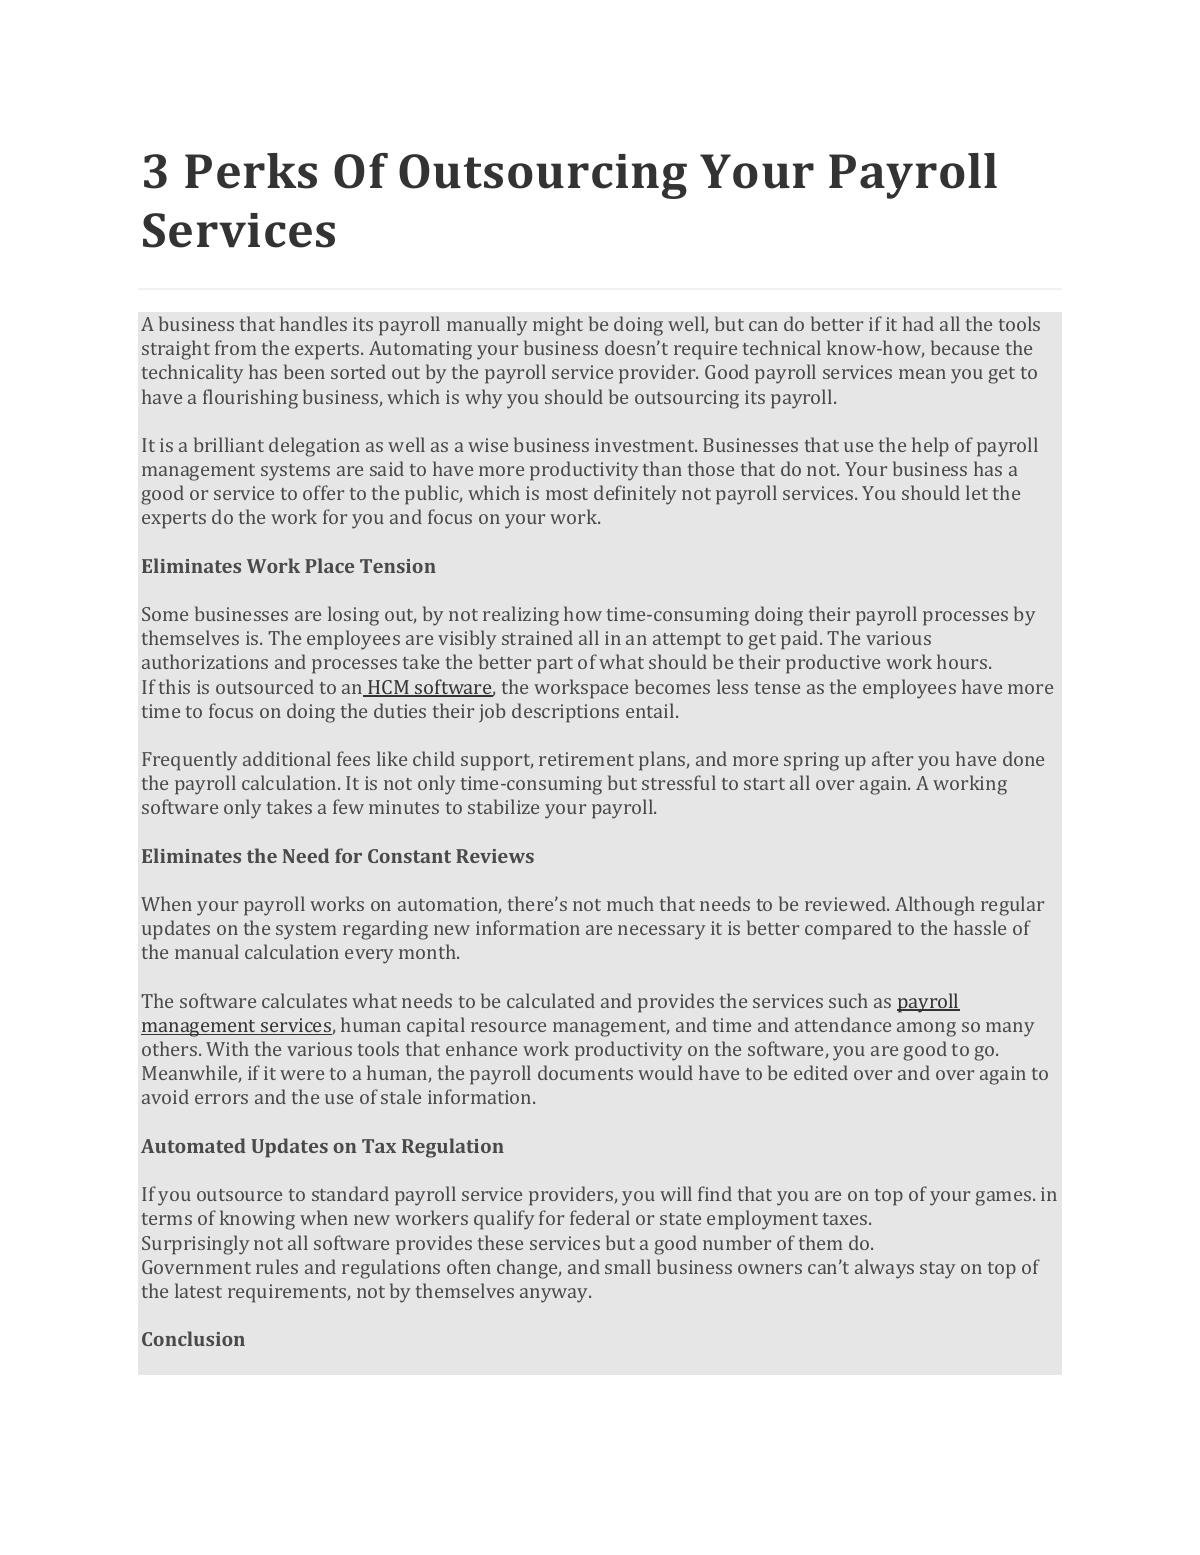 3 Perks Of Outsourcing Your Payroll Services